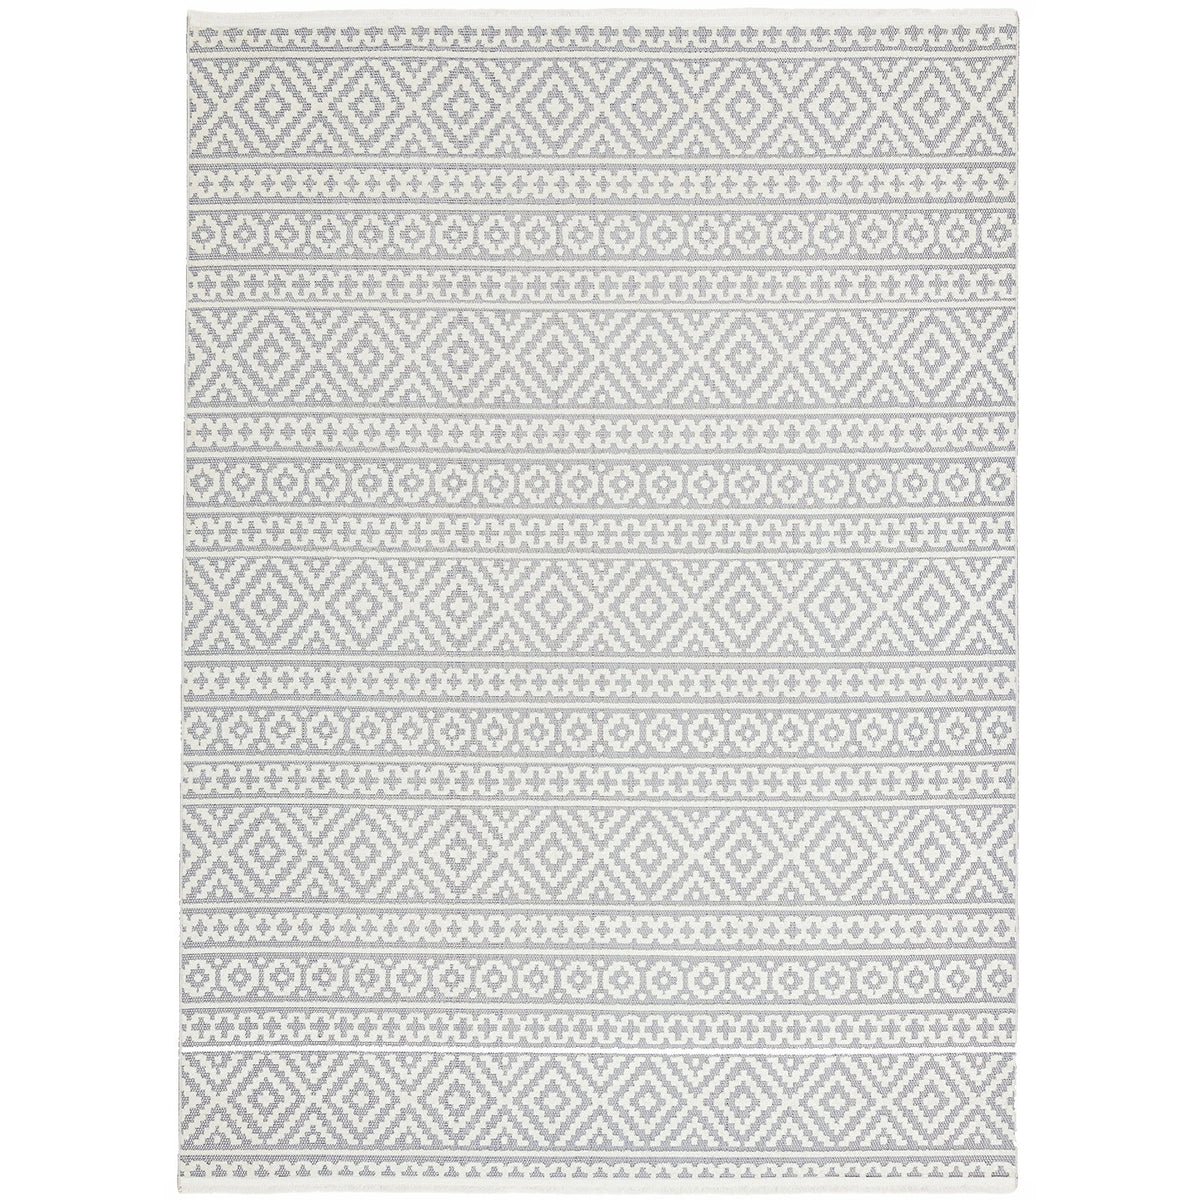 Jazz Patterned Outdoor Rug, Silver